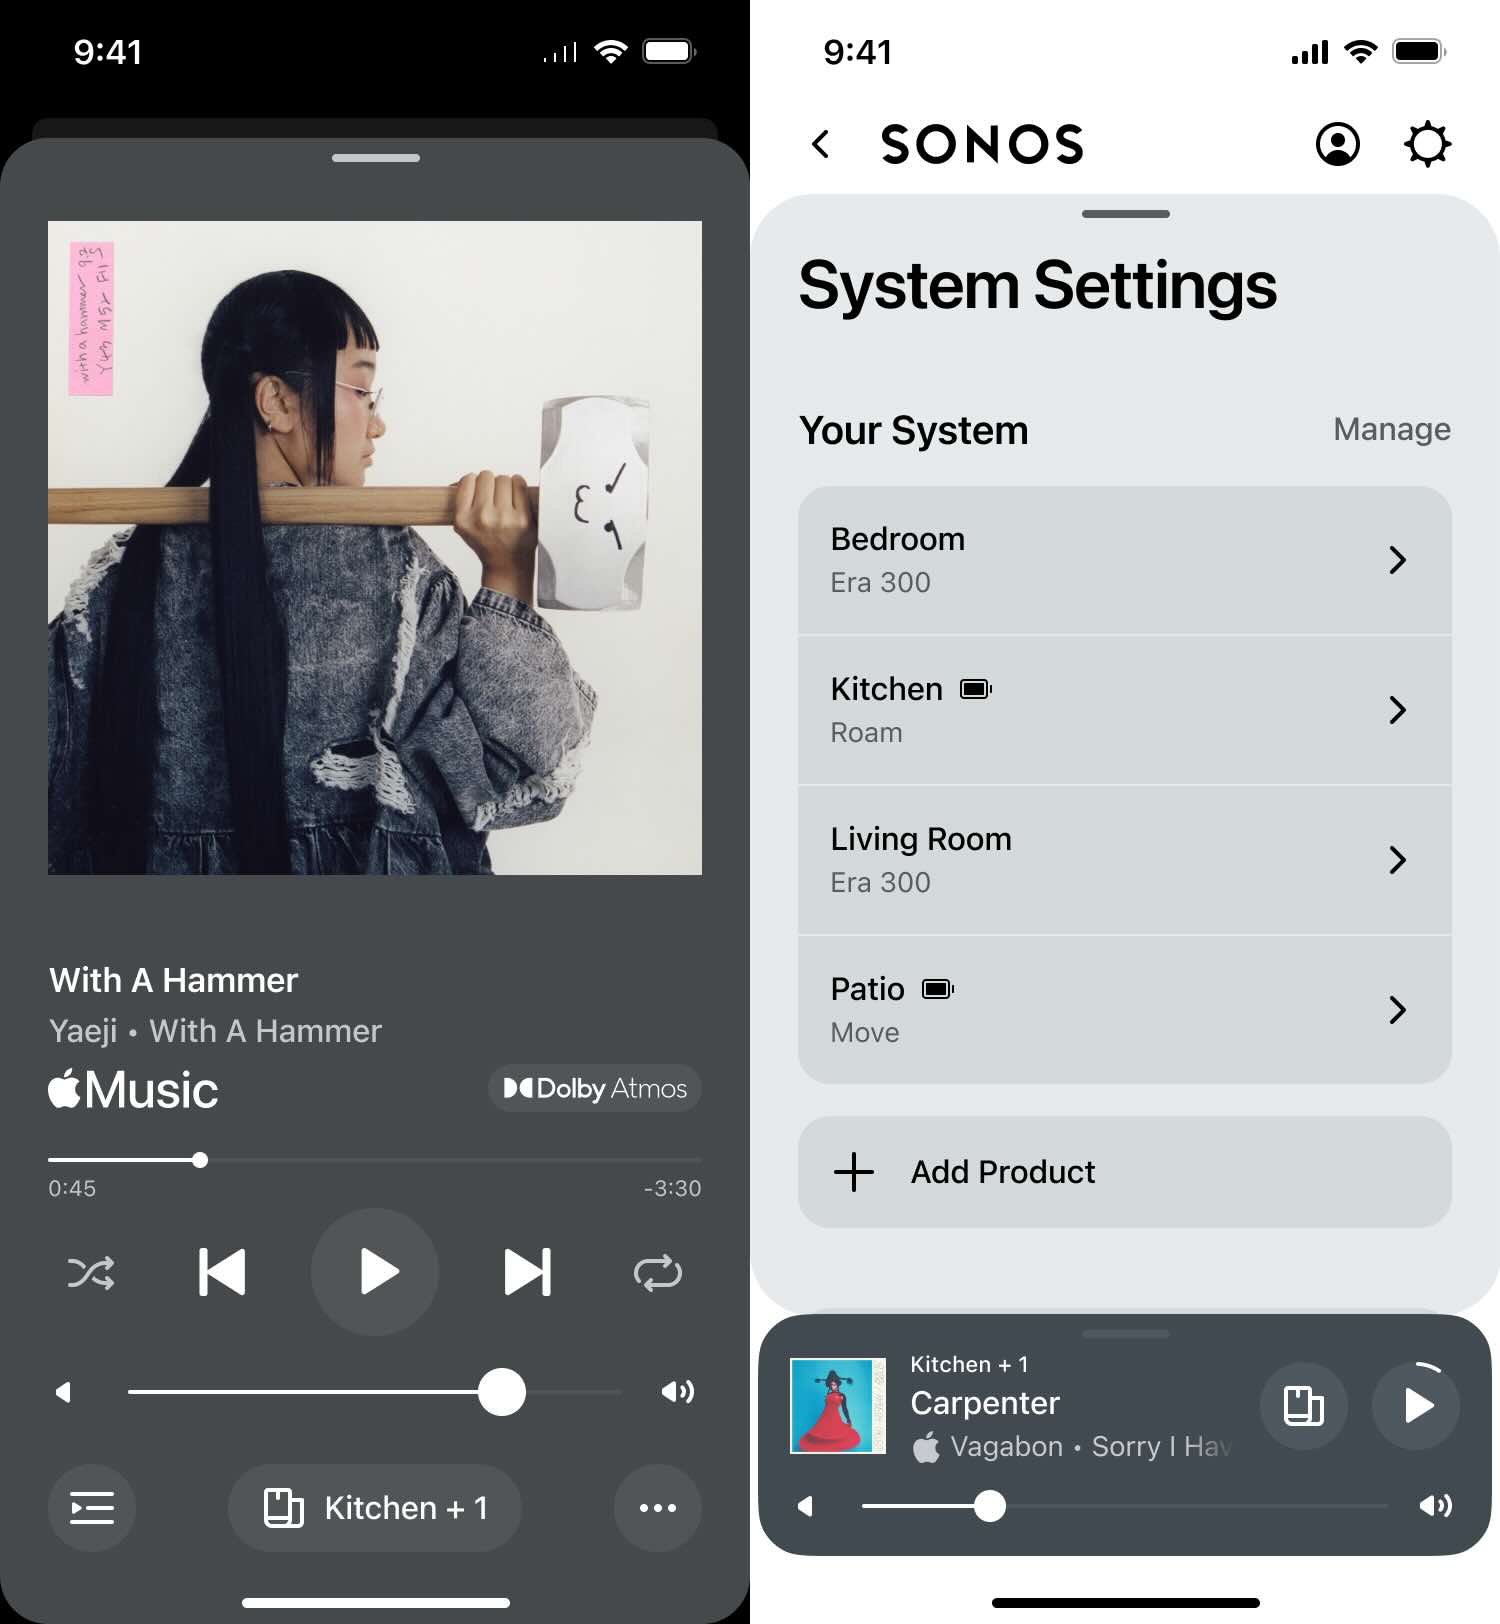 sonos new app now playing and setings